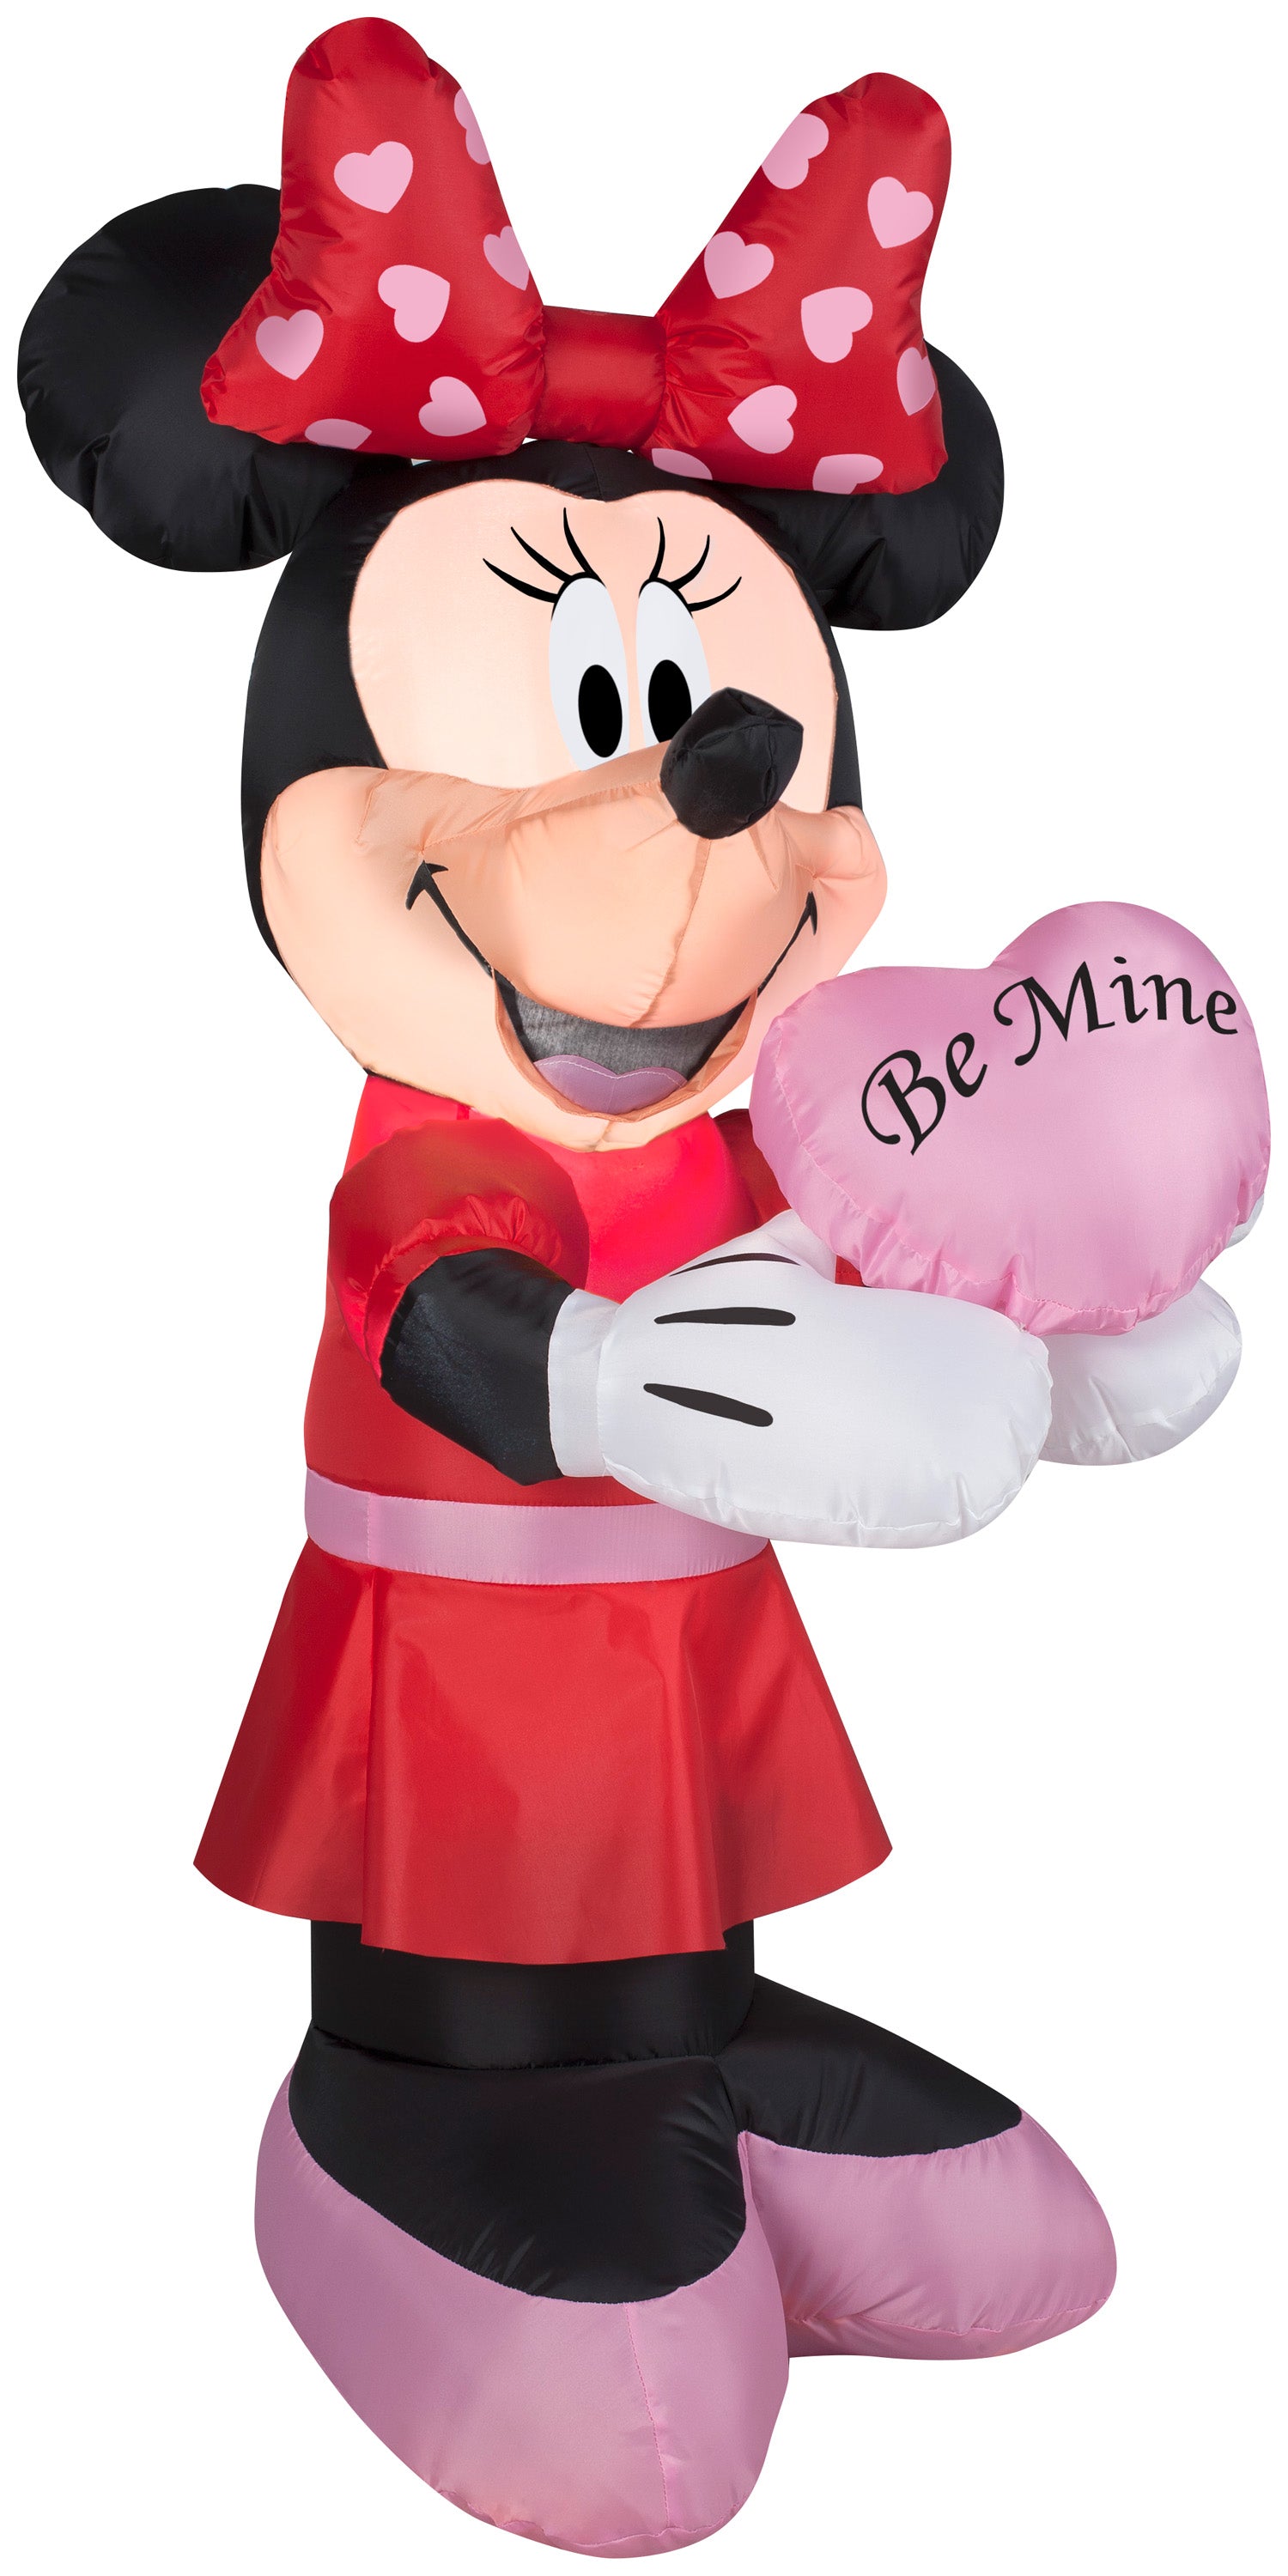 Gemmy Airblown Inflatable Valentine Minnie Mouse, 3.5 ft Tall